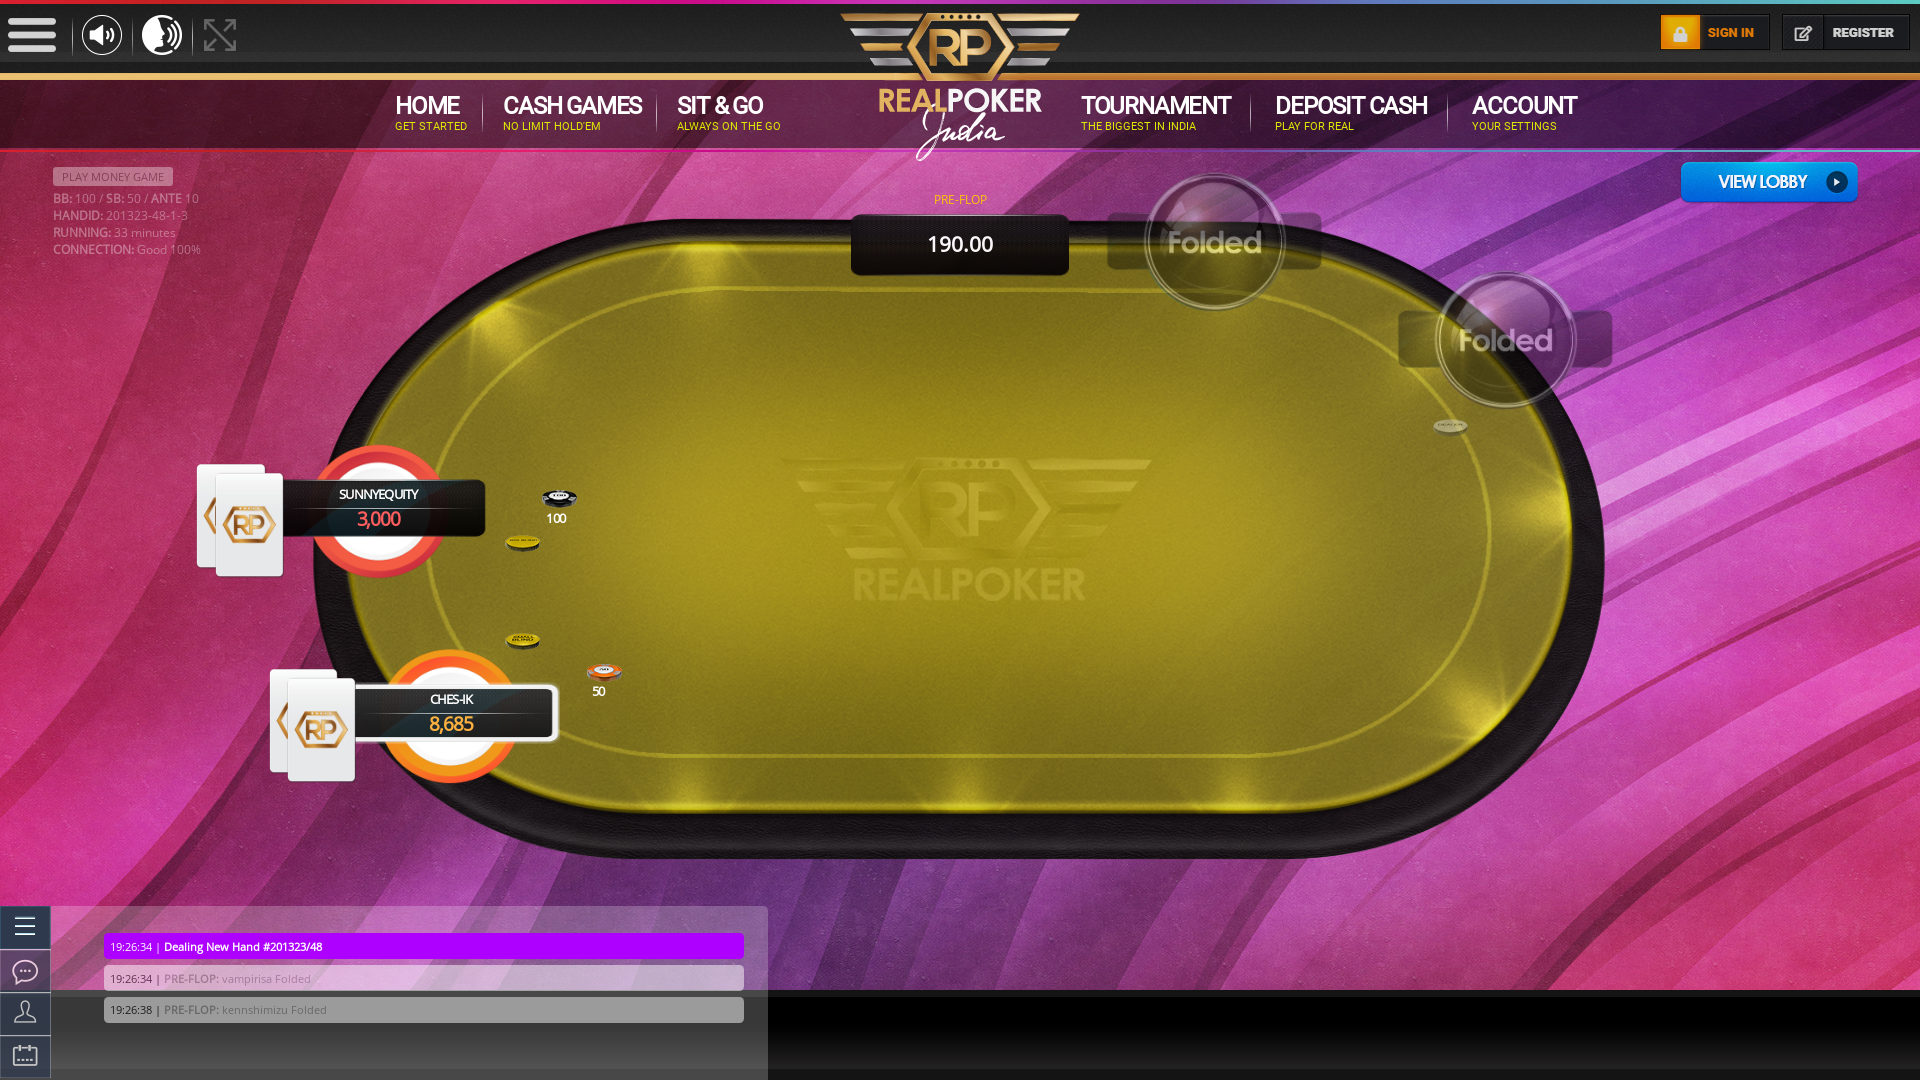 Real poker 10 player table in the 32nd minute of the match